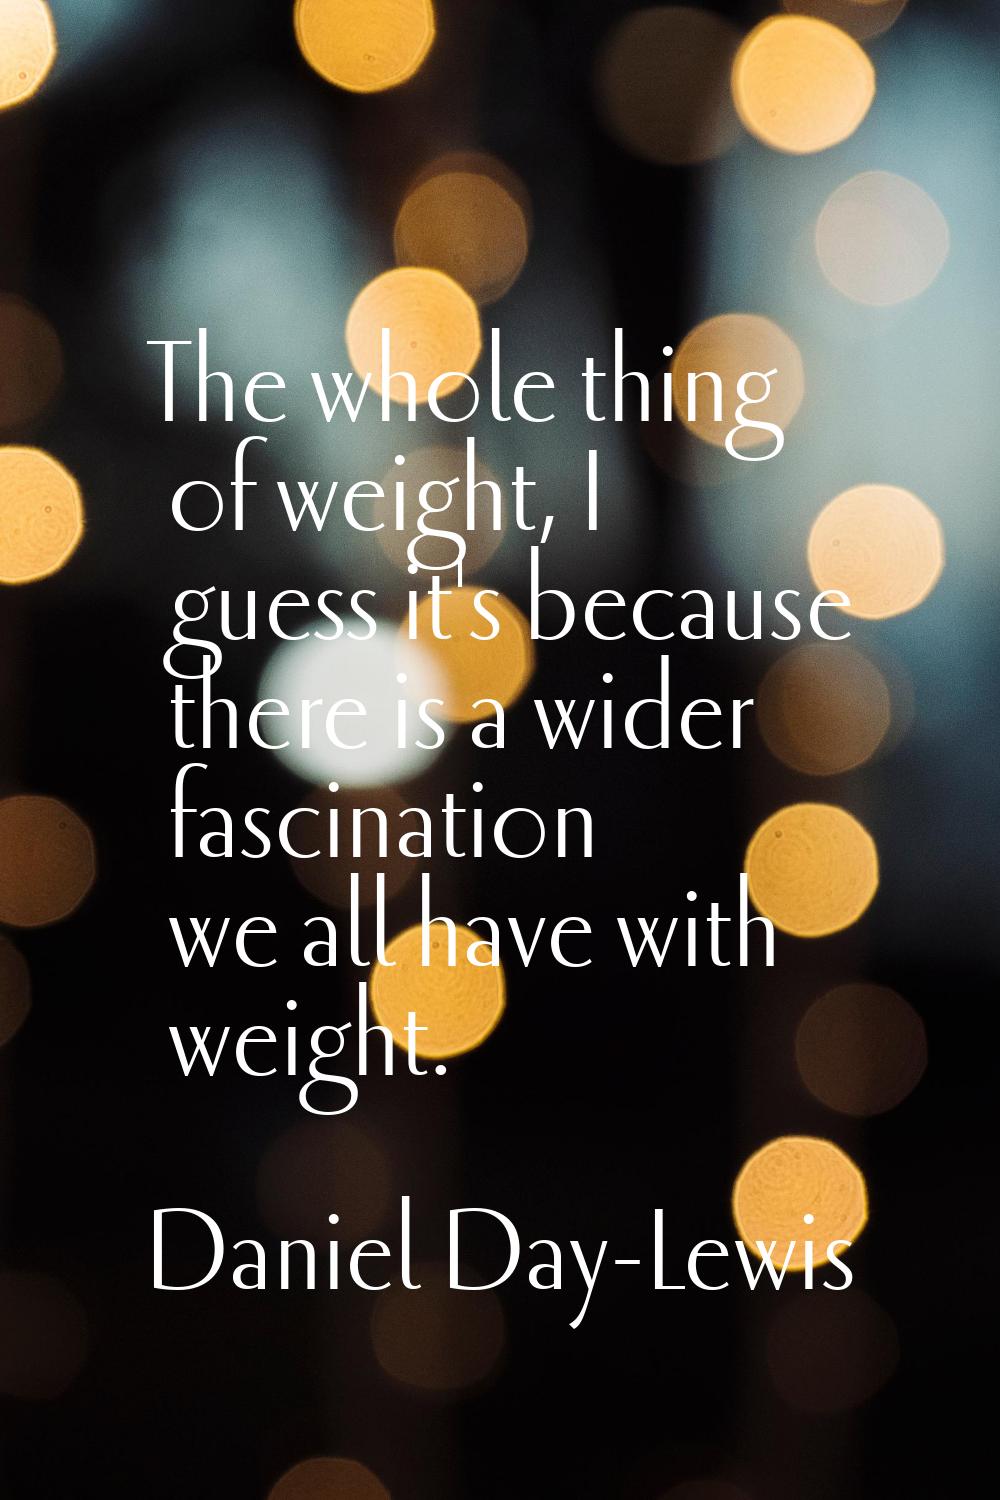 The whole thing of weight, I guess it's because there is a wider fascination we all have with weigh